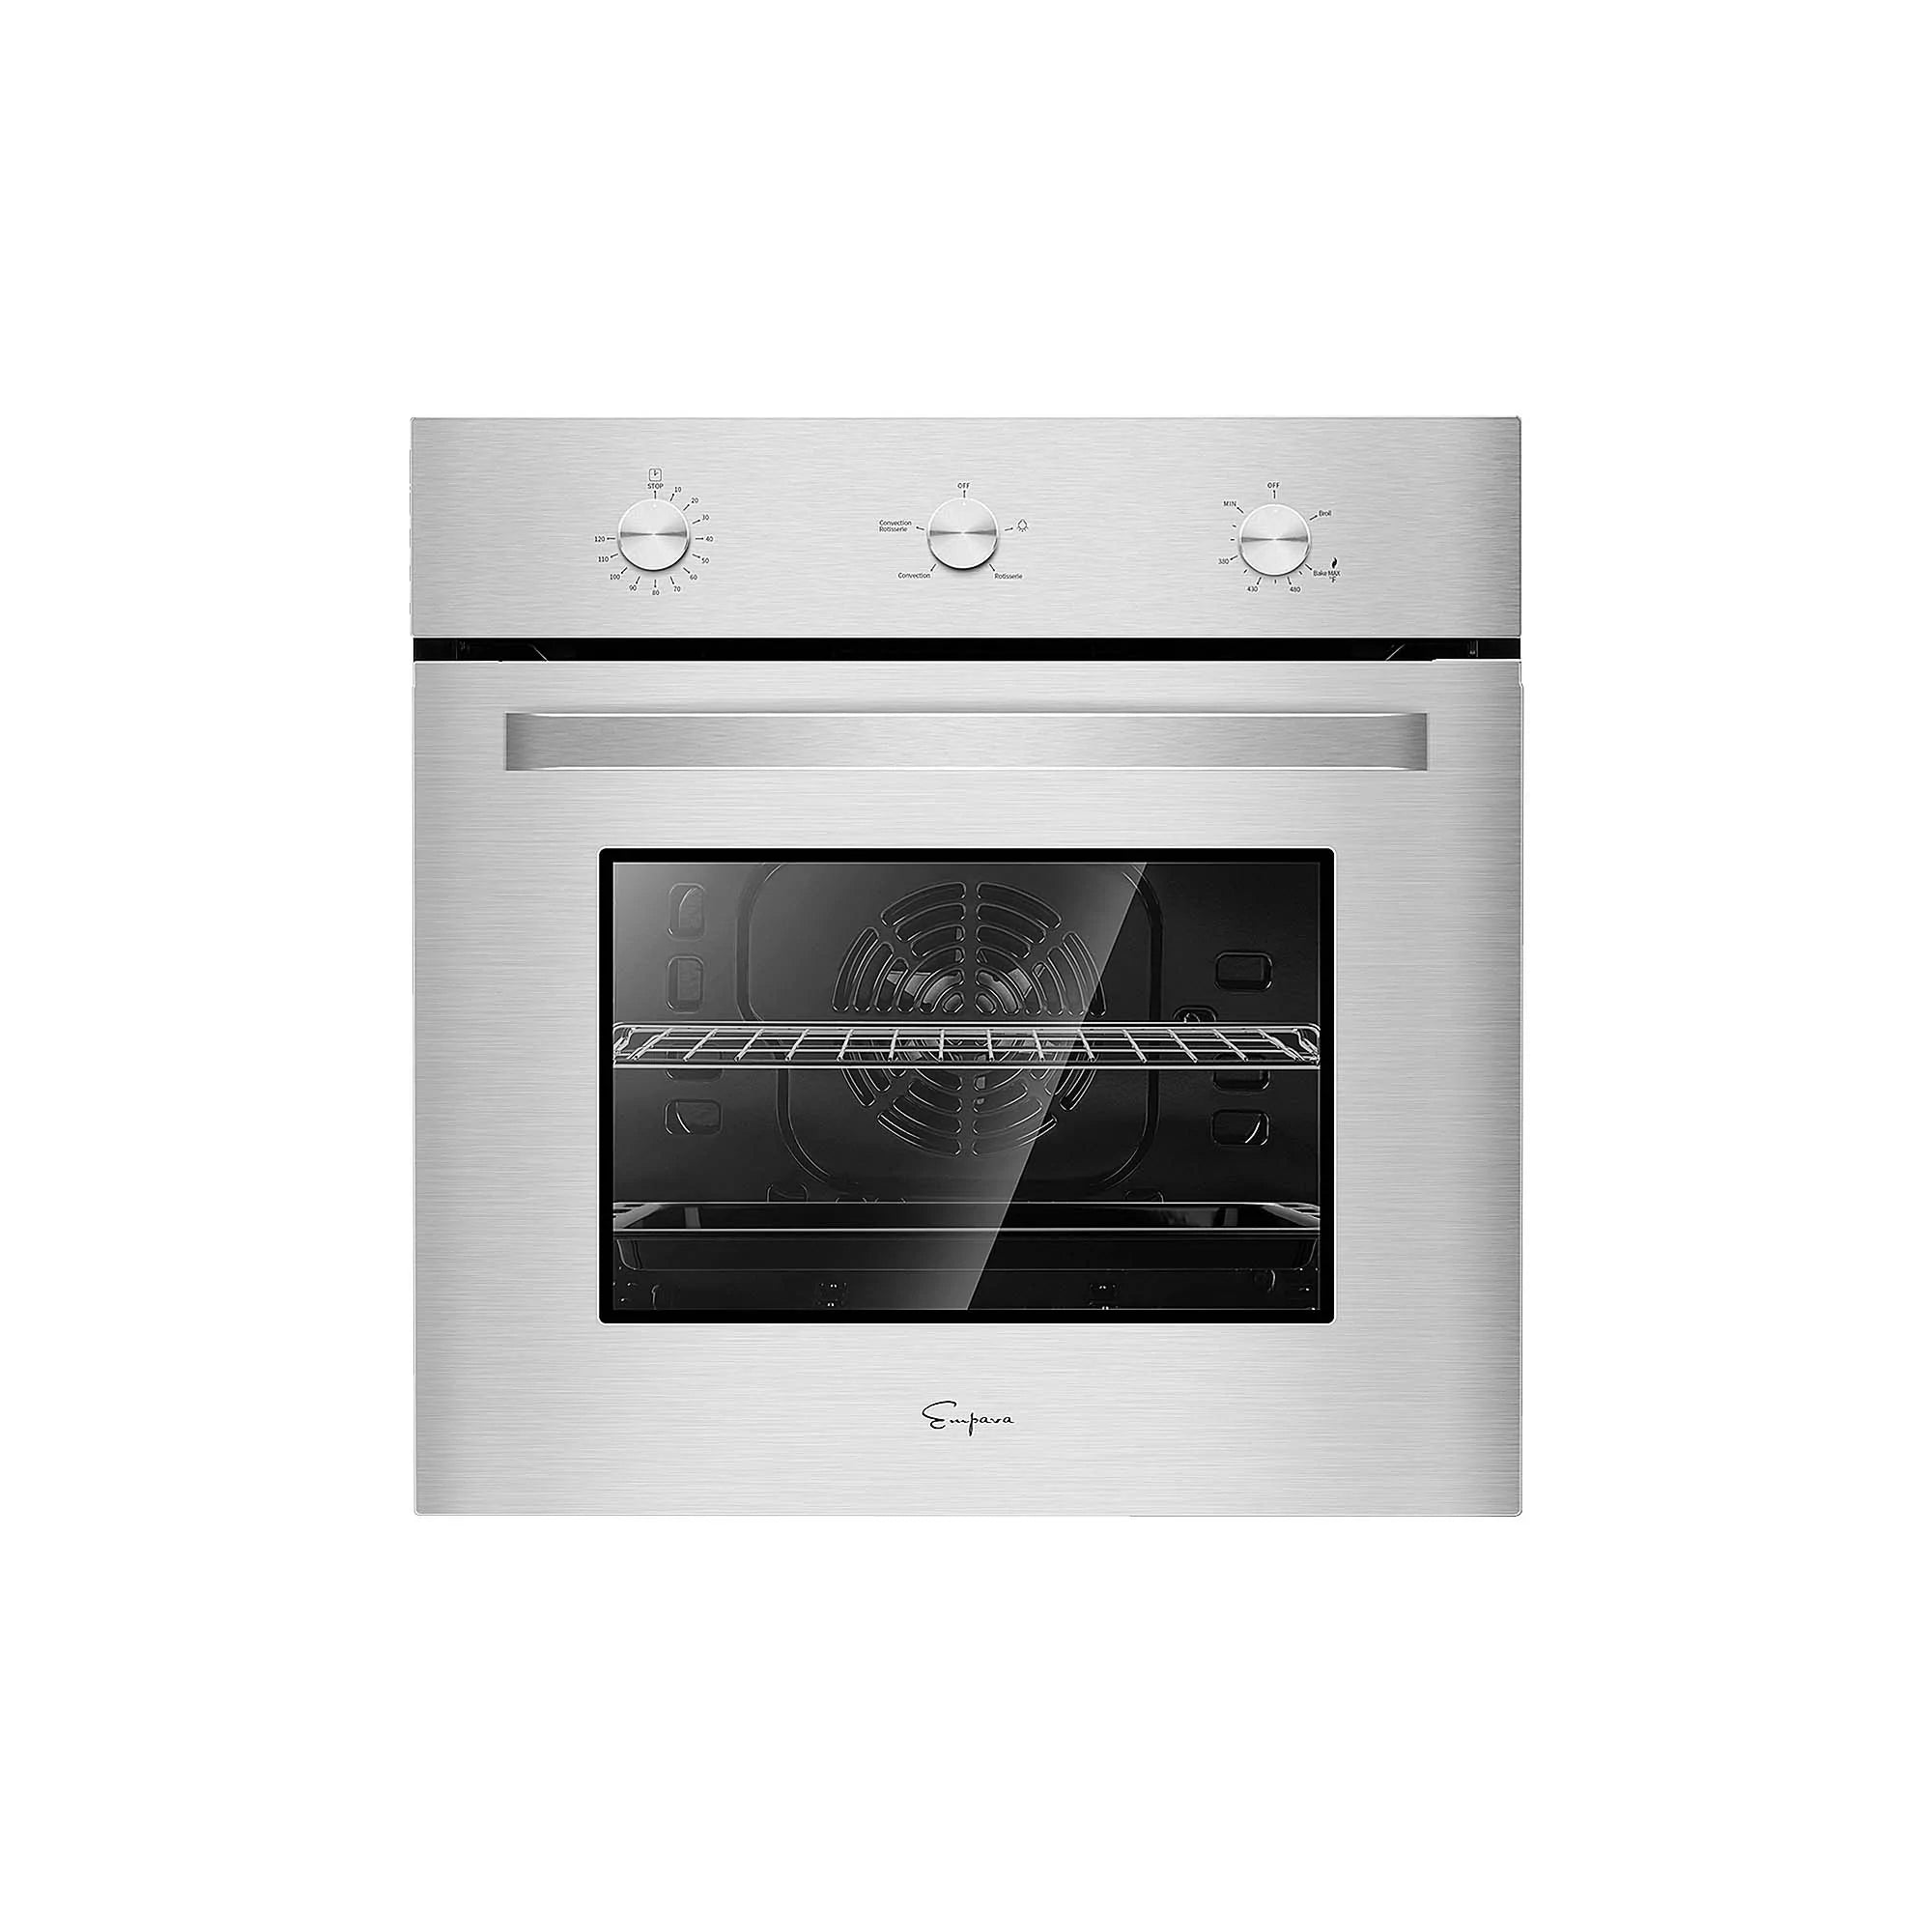 Empava 24 inch 2.3 Cu. ft. Gas Wall Oven 24WO10L - Only For LPG Gas - Smart Kitchen Lab